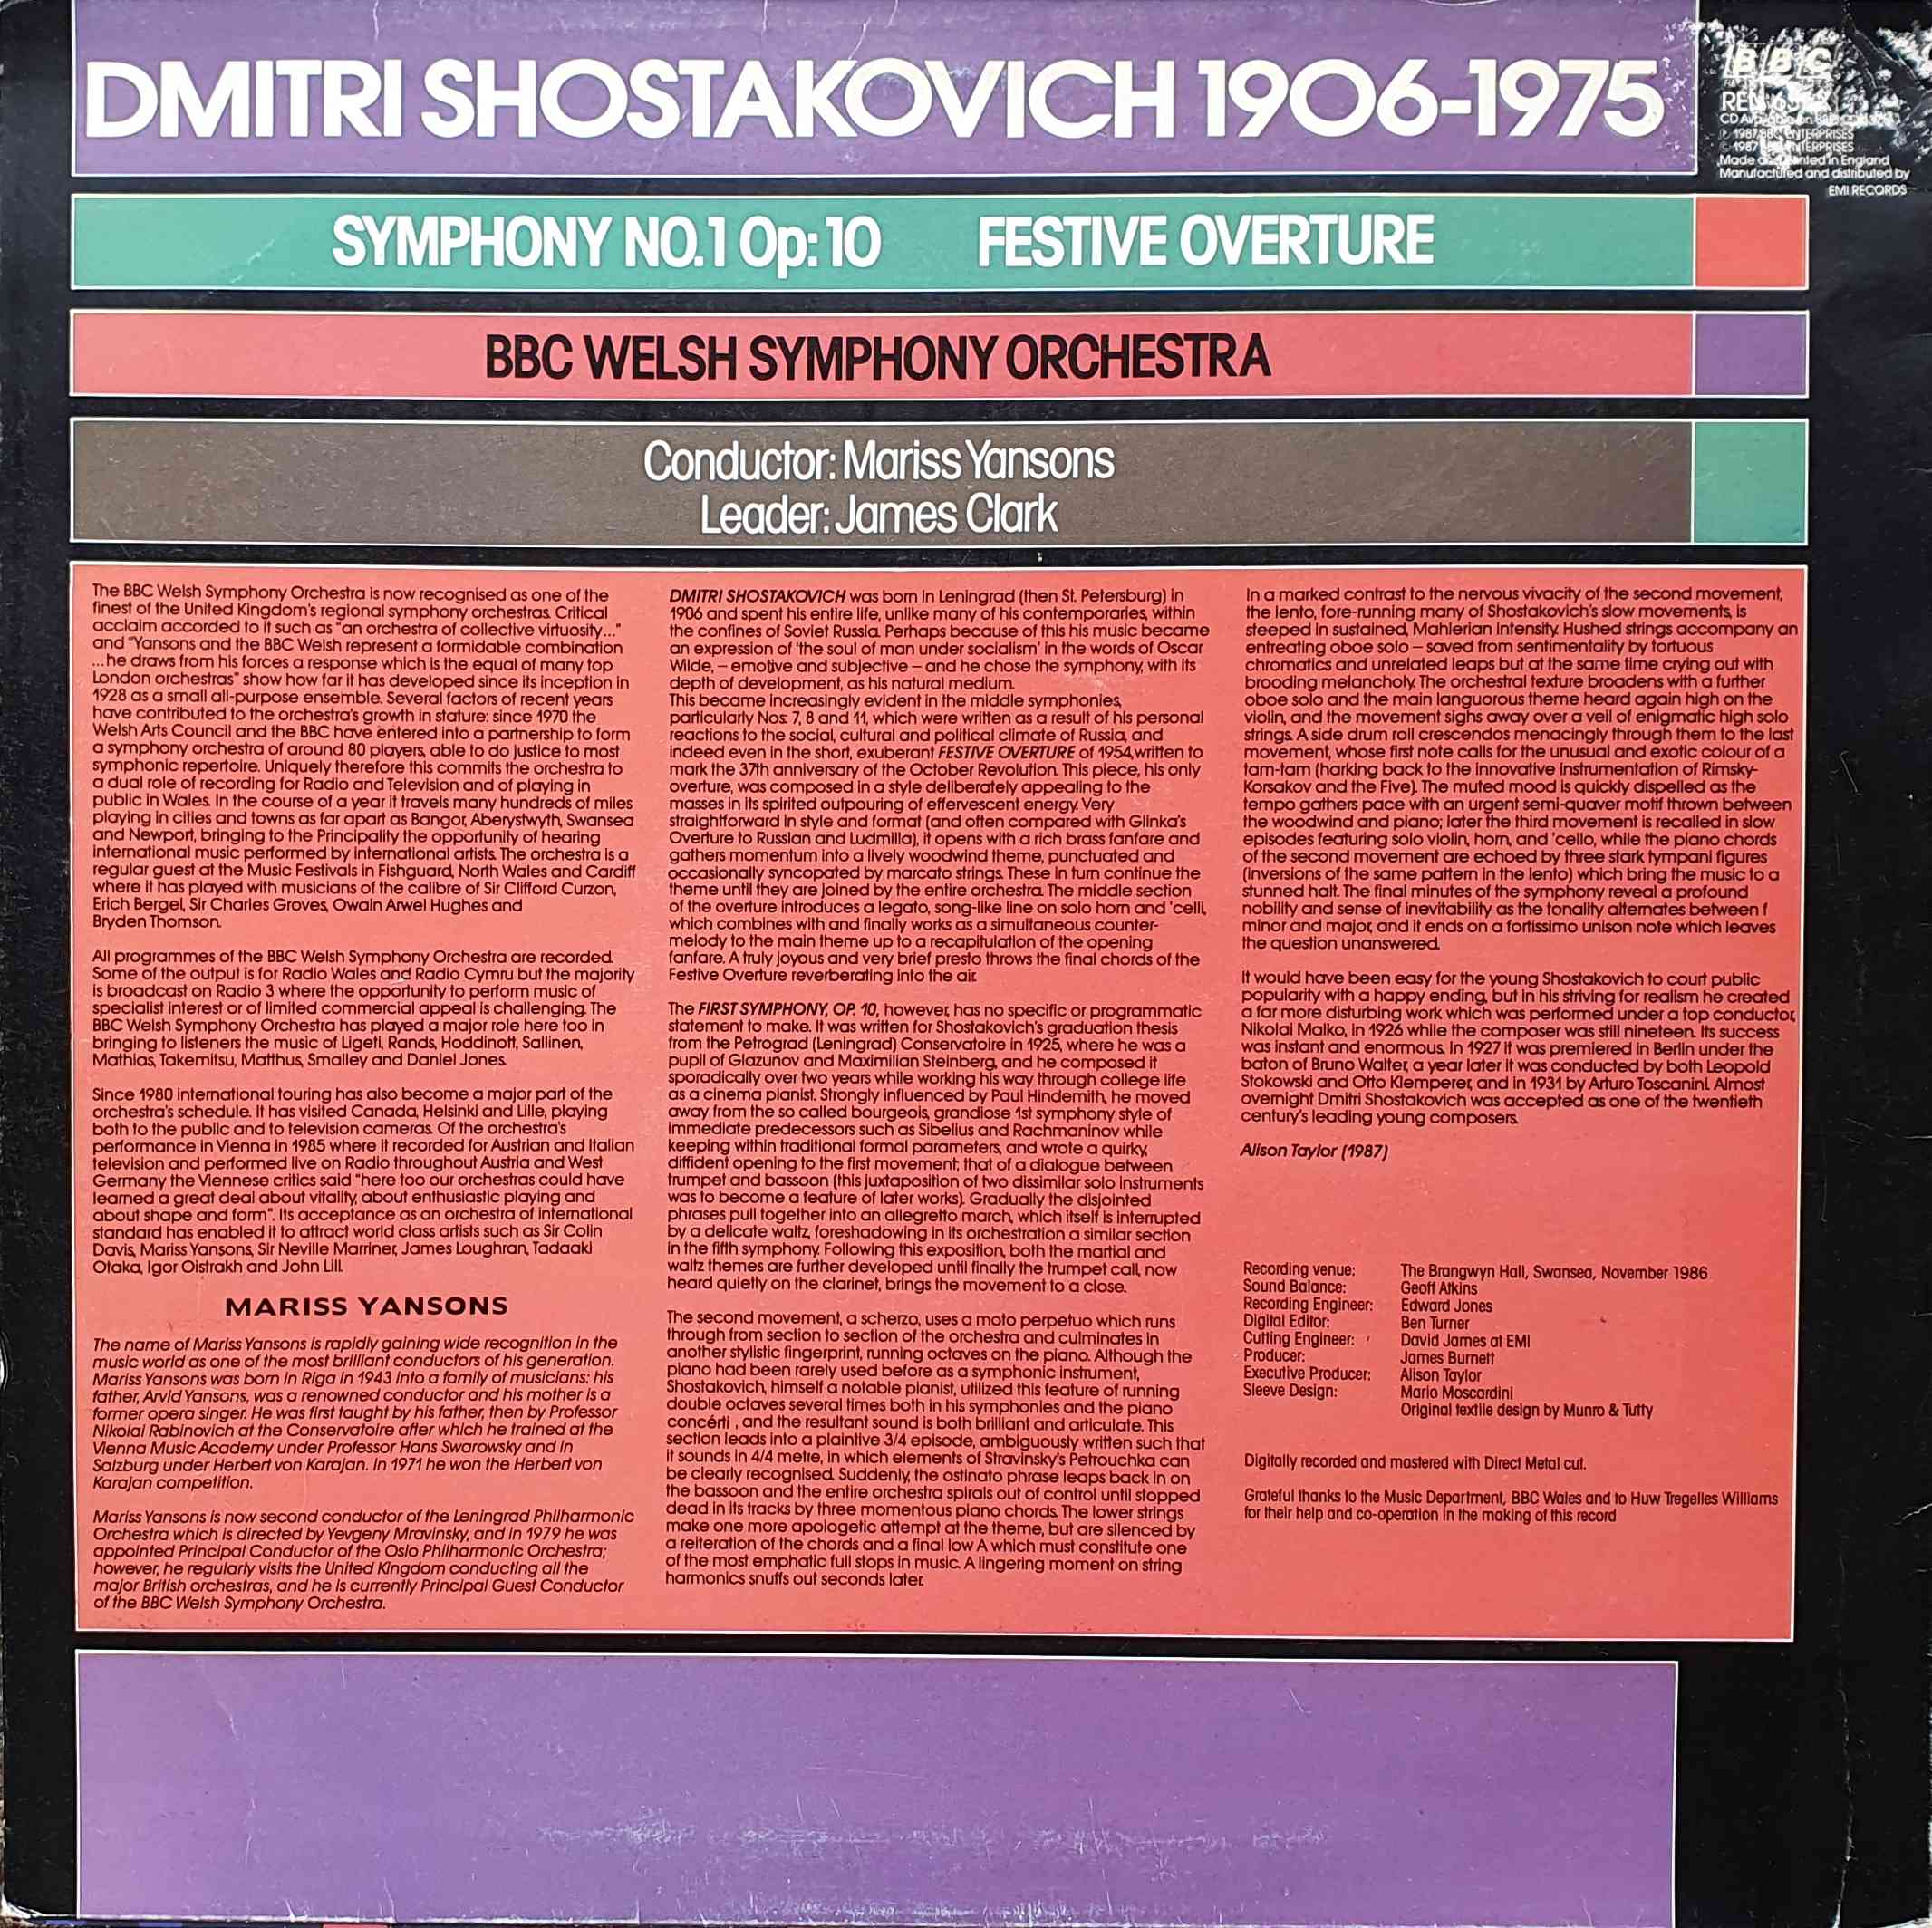 Picture of REN 637 Shostakovich symphony no. 1 - Festival overture by artist Shostakovich from the BBC records and Tapes library